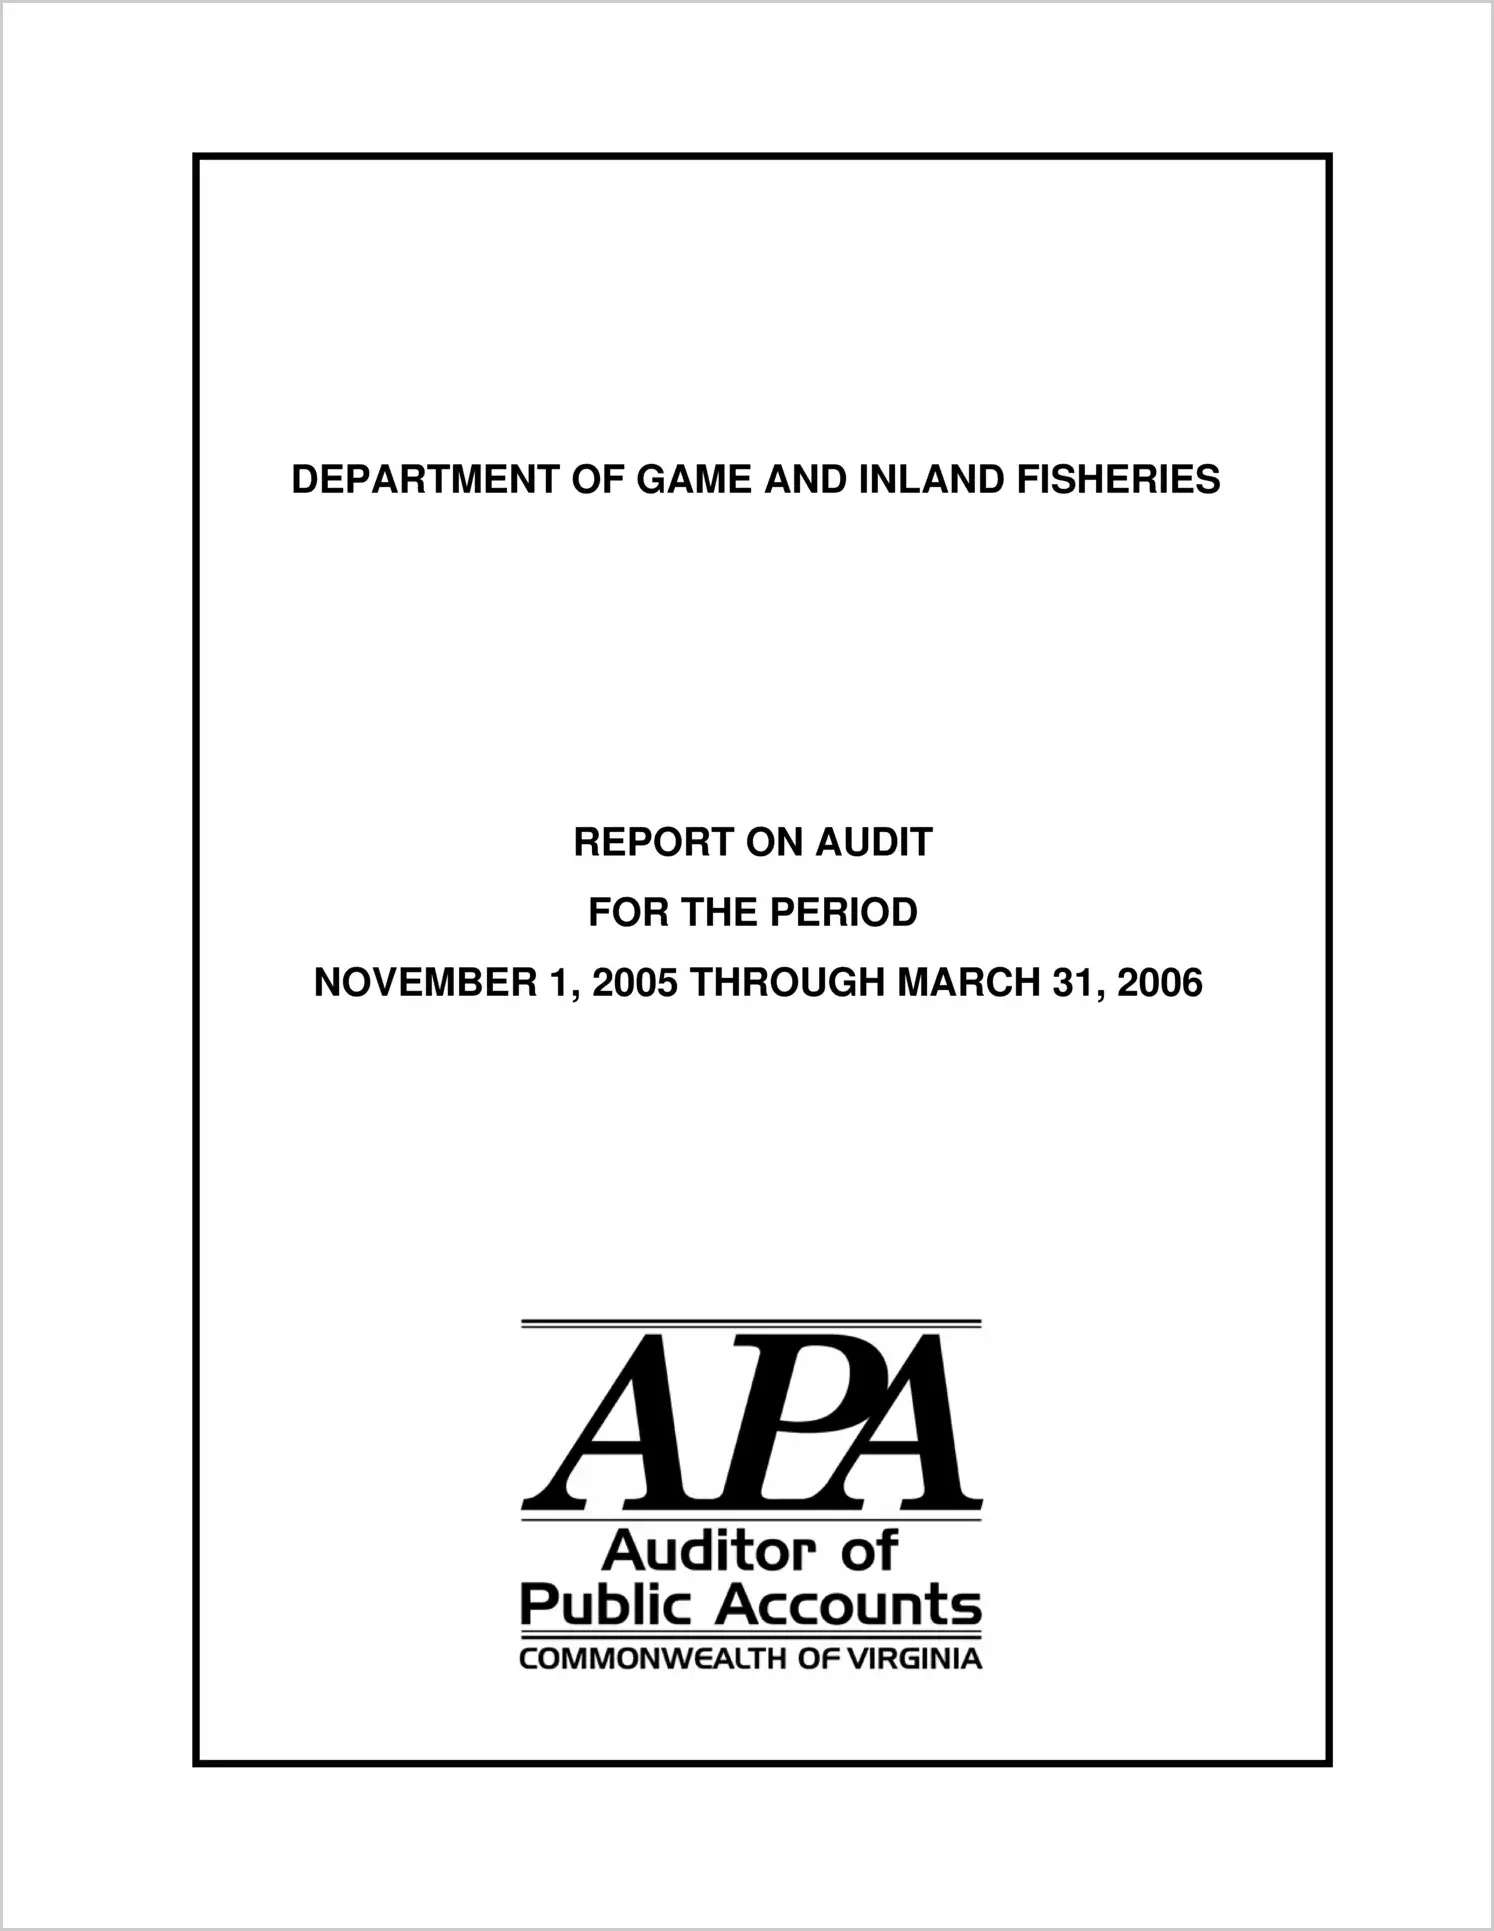 Department of Game and Inland Fisheries for the period November 1, 2005 through March 31, 2006